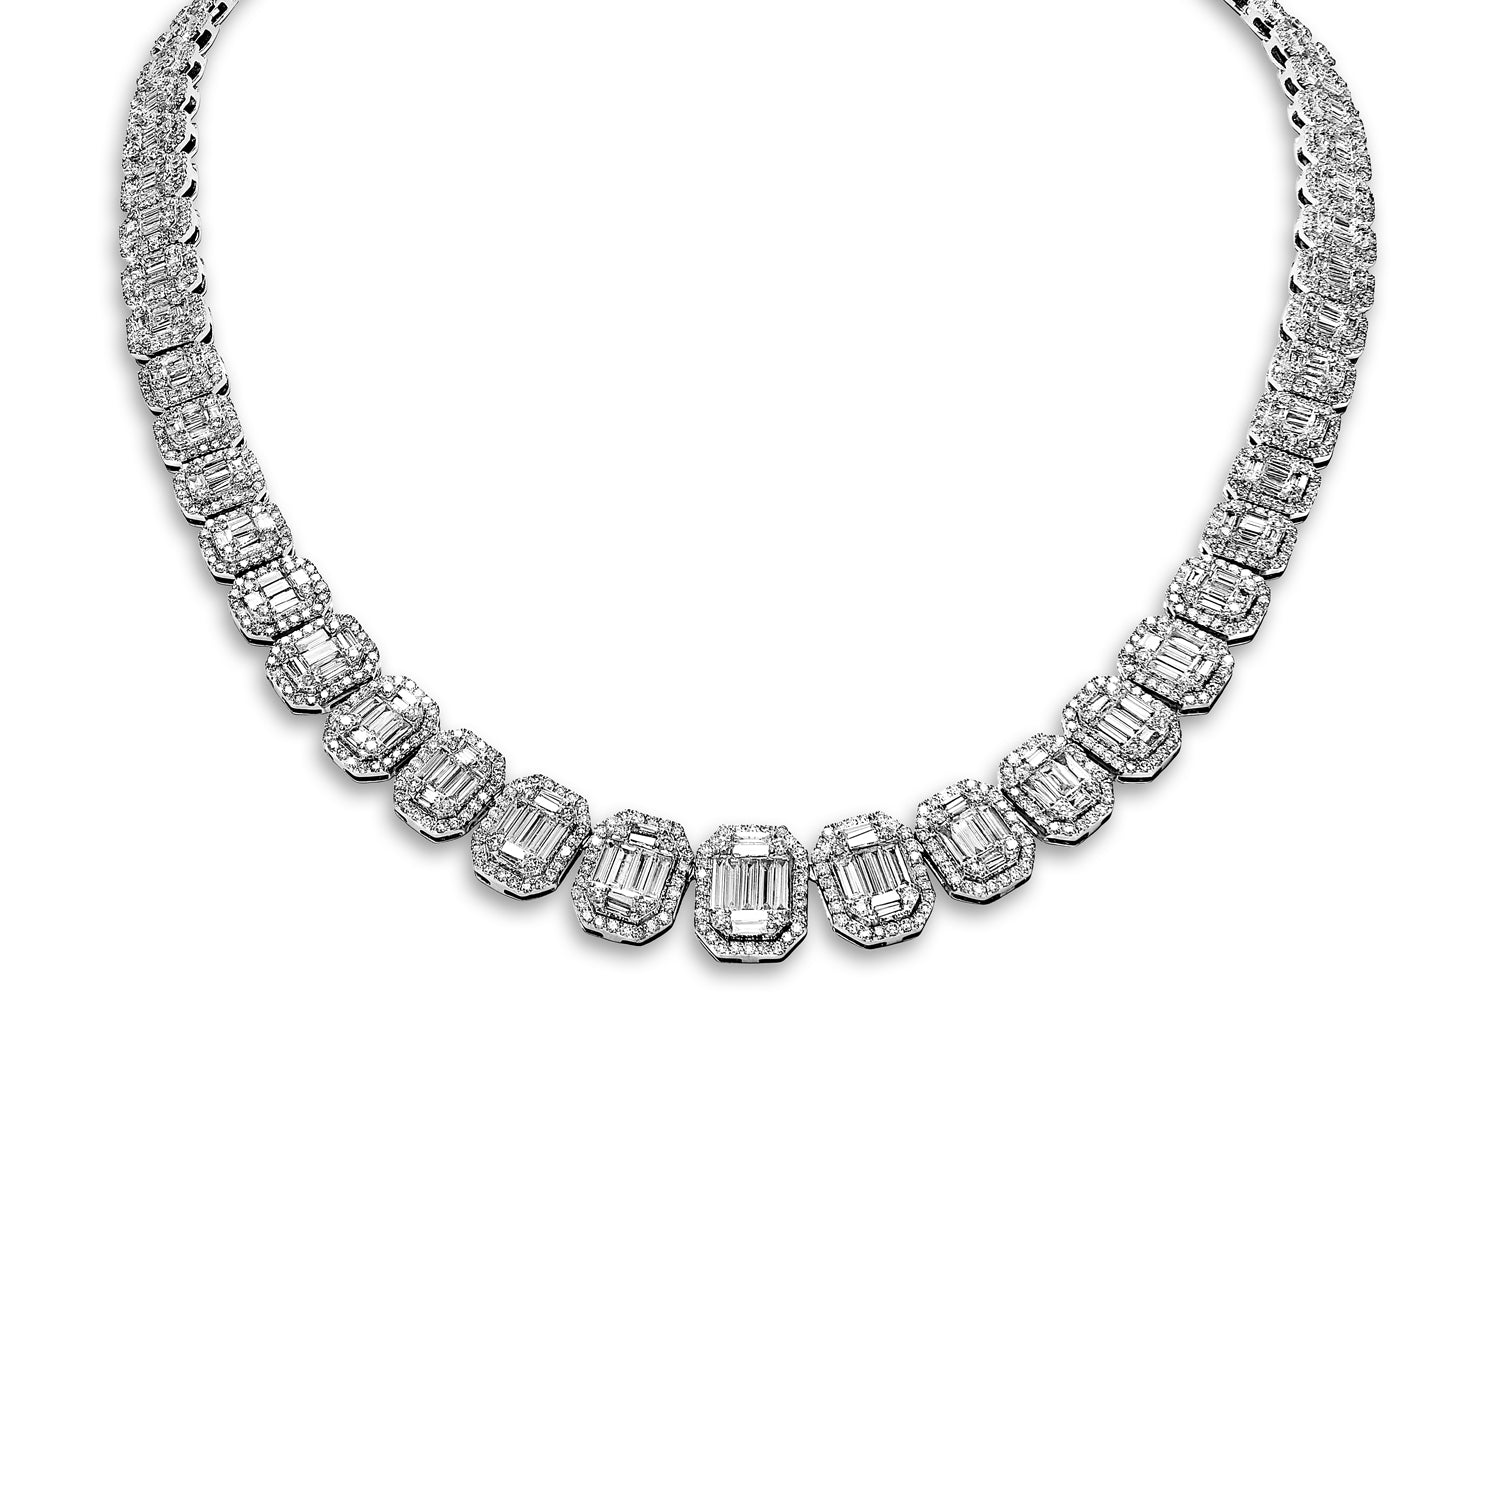 Halle 27 Carat Combine Mixed Shape Diamond Necklace in 14kt White Gold